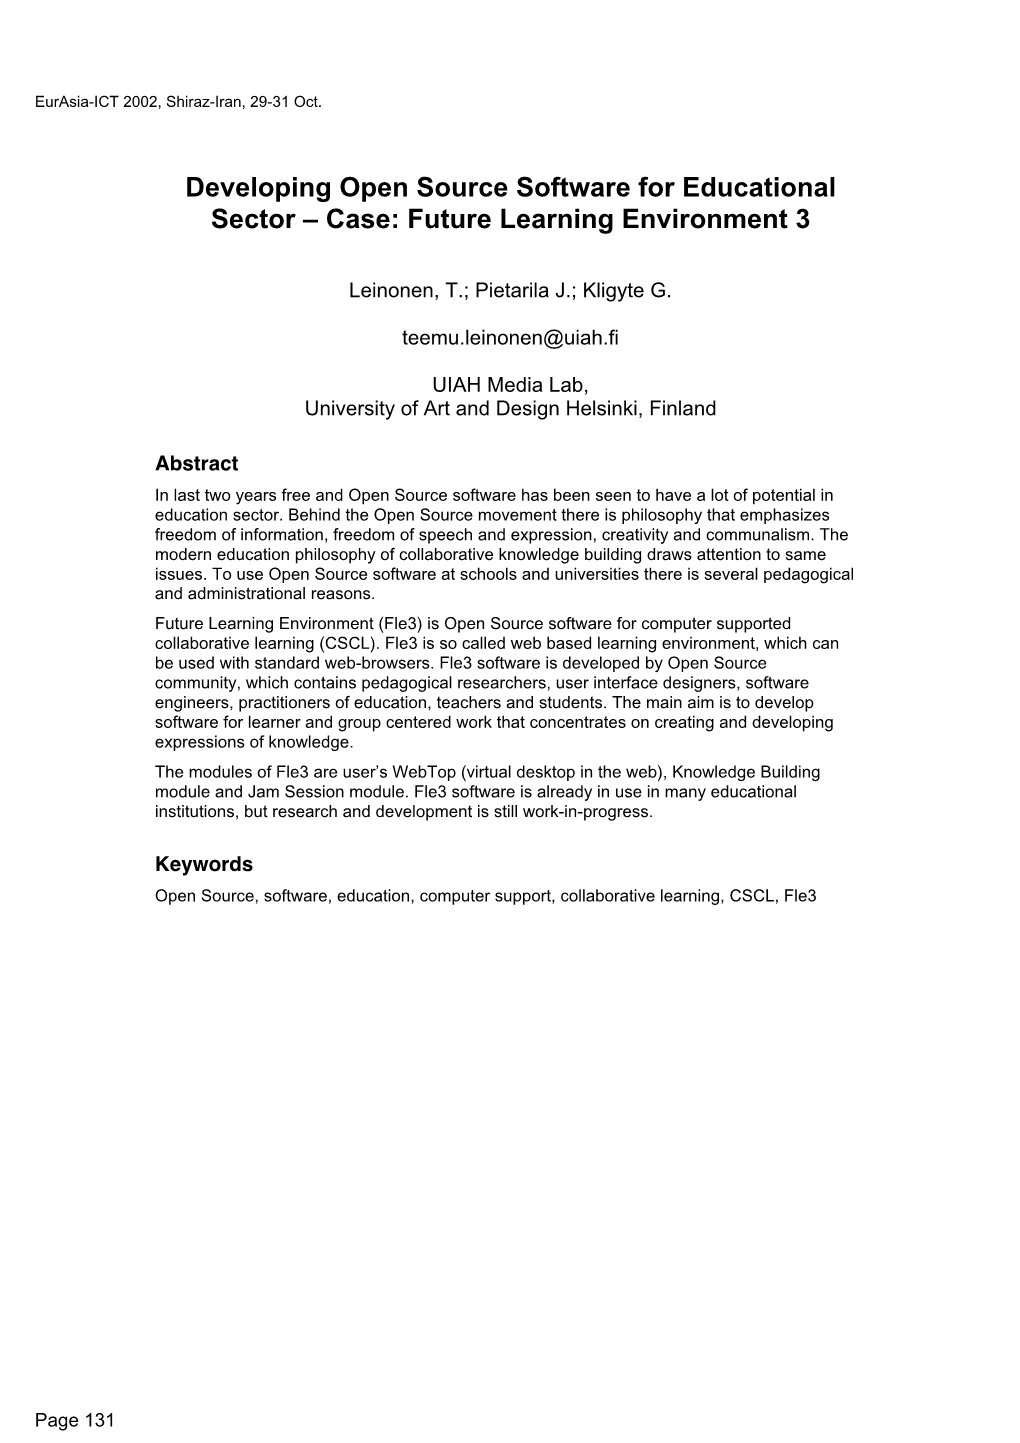 Developing Open Source Software for Educational Sector – Case: Future Learning Environment 3